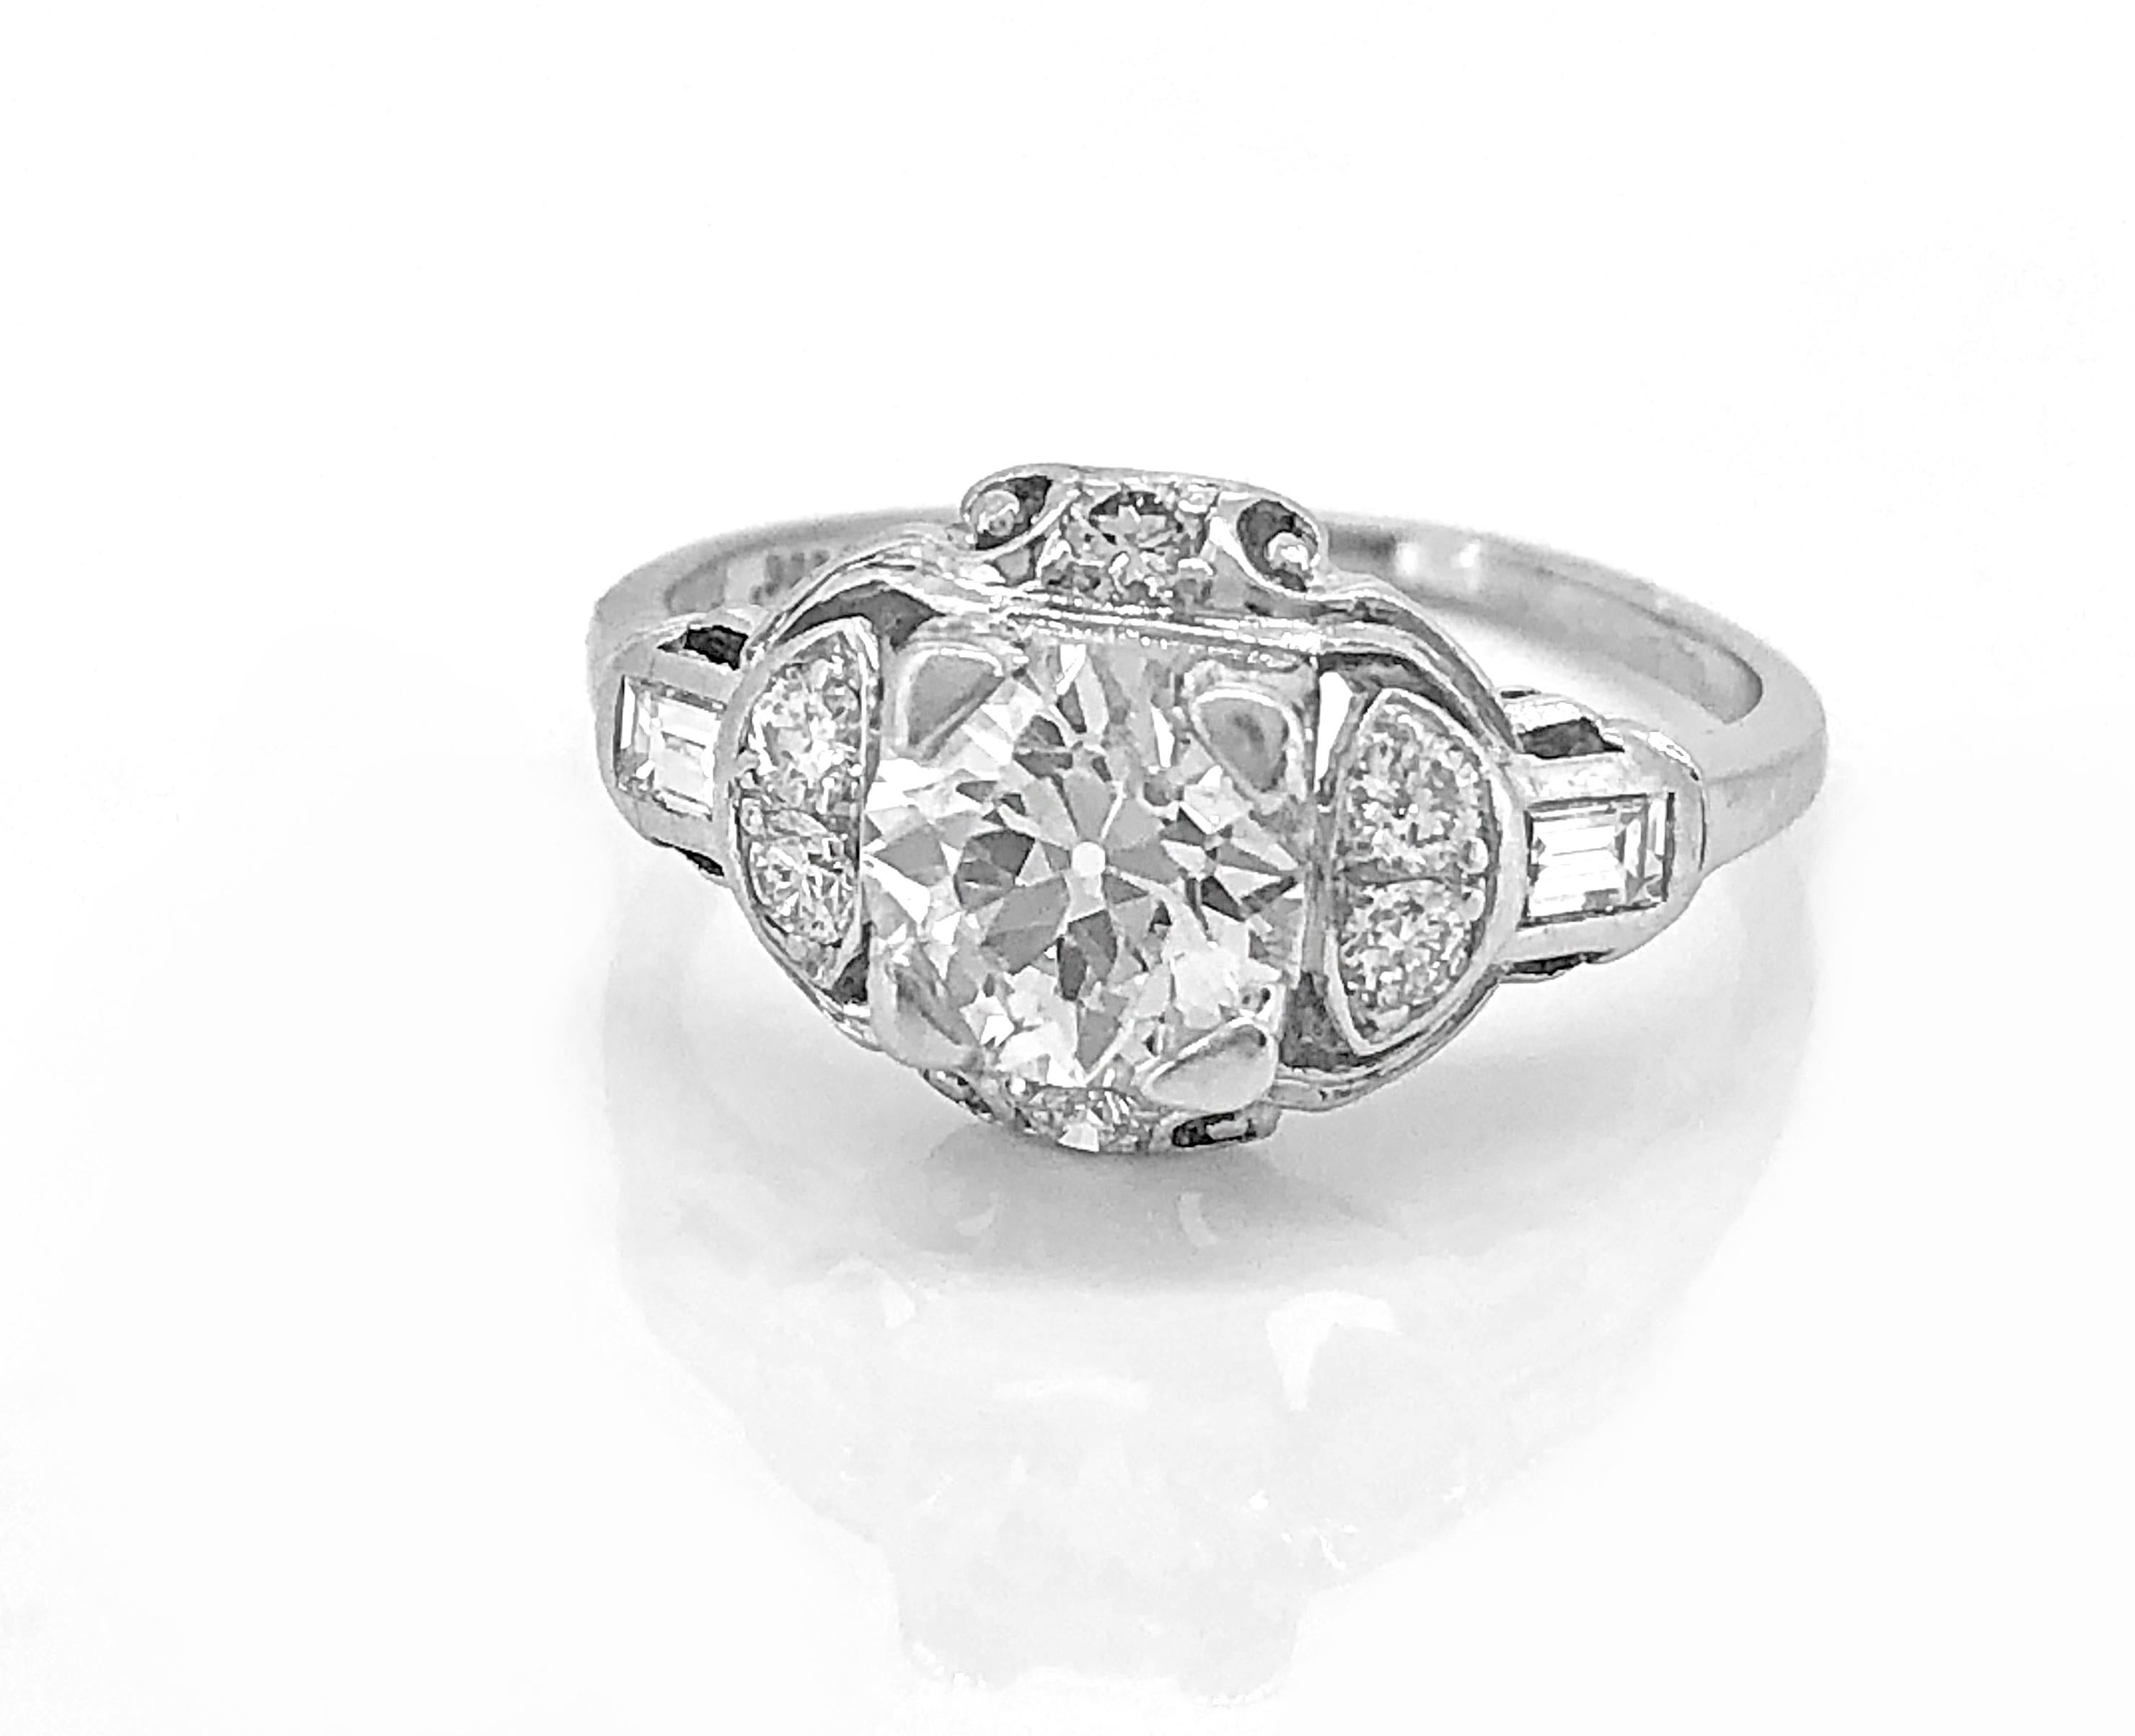 An incredible antique engagement ring crafted in platinum and features a 1.08ct. apx. European cut center diamond with VS2 clarity and H color. There are .25ct. apx. T.W. of baguette and transitional cut accenting diamonds. This ring is